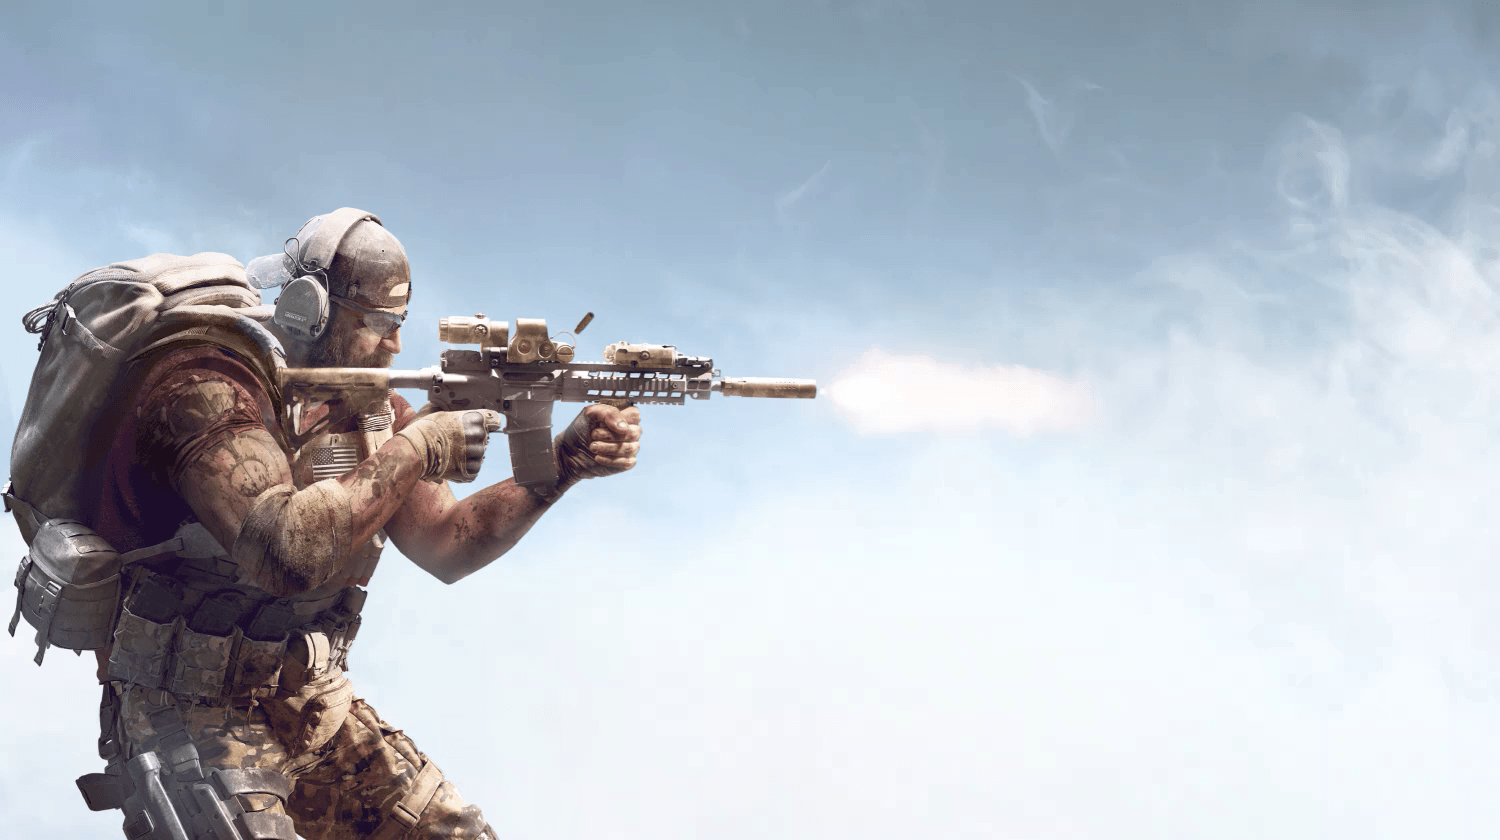 New Tom Clancys Ghost Recon Breakpoint 2020 Wallpapers